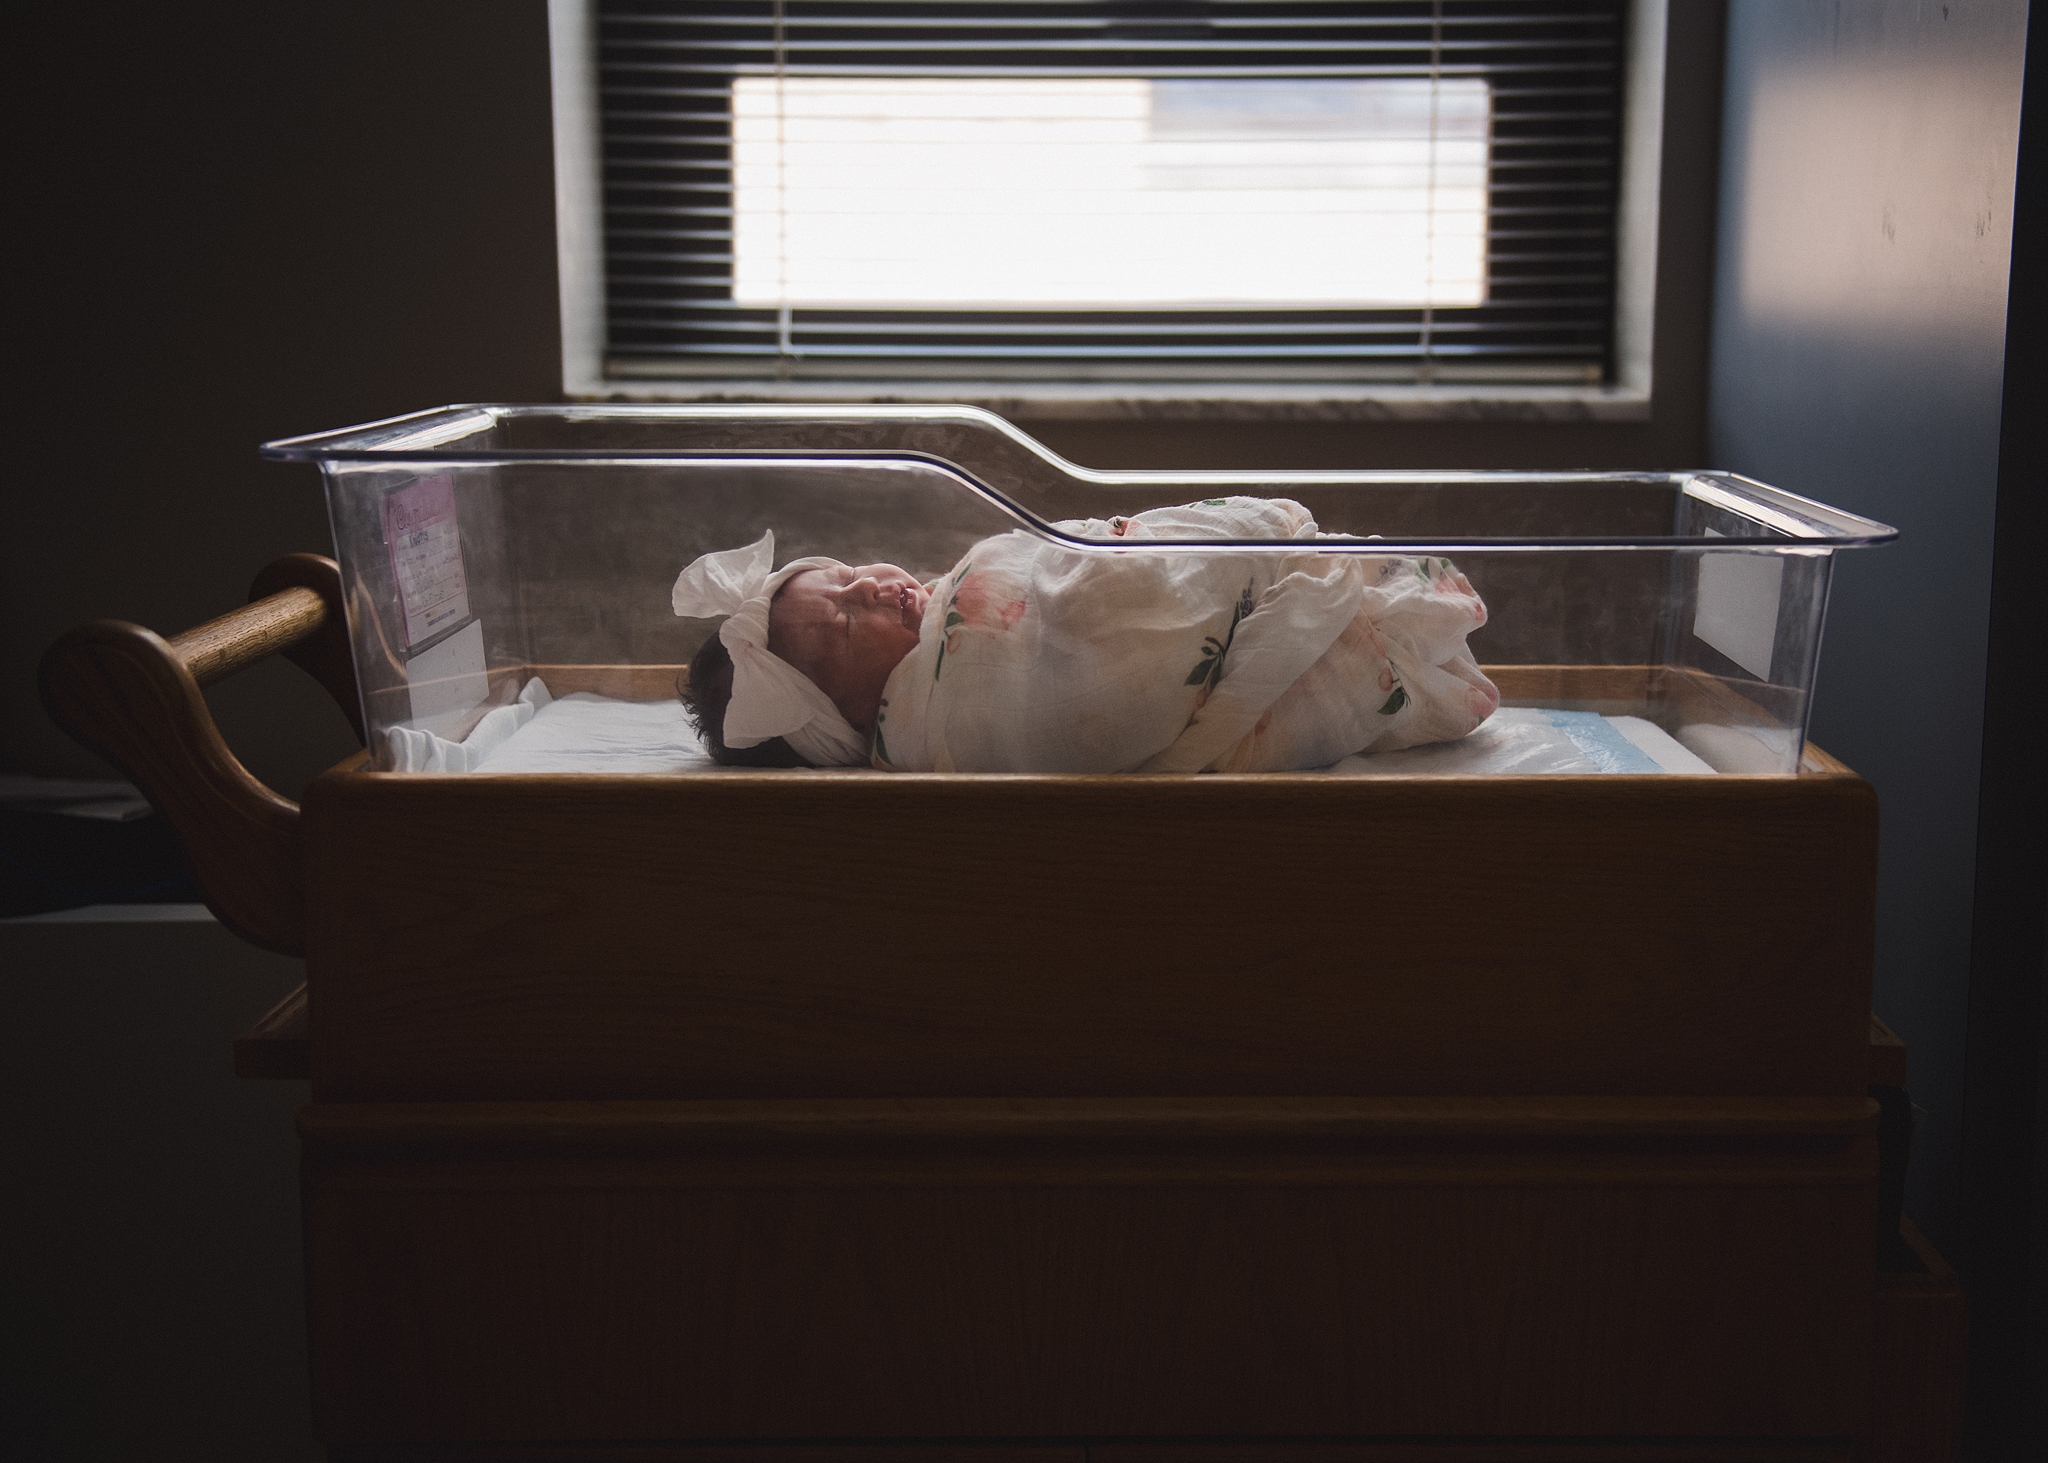 welcome to the world berkeley - lori pickens photography